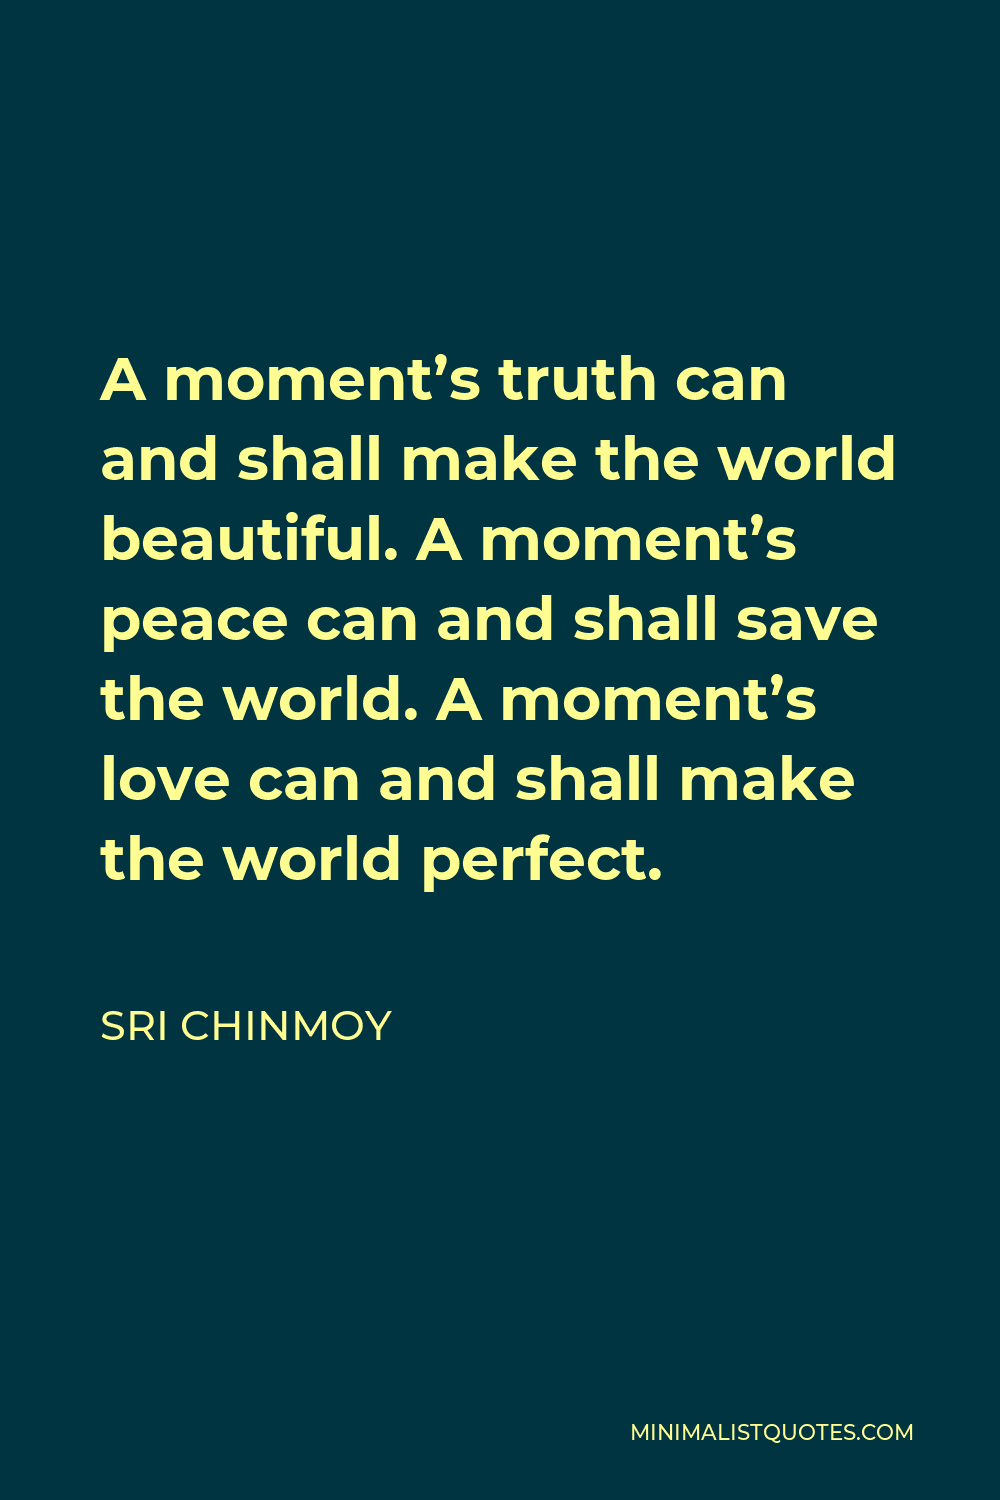 Sri Chinmoy Quote - A moment’s truth can and shall make the world beautiful. A moment’s peace can and shall save the world. A moment’s love can and shall make the world perfect.